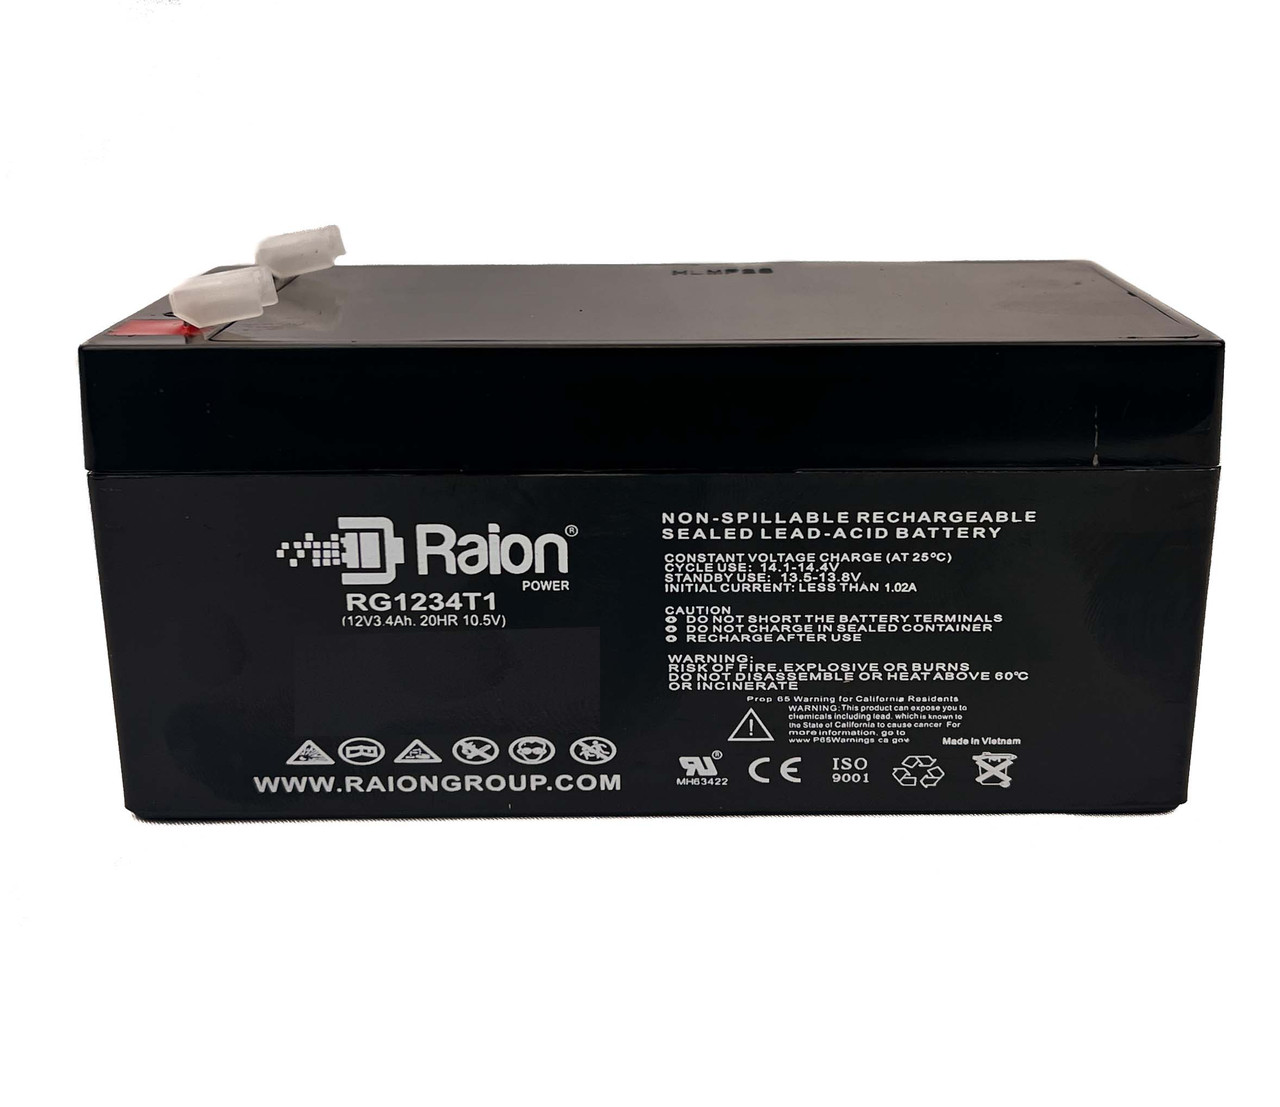 Raion Power RG1234T1 Rechargeable Compatible Replacement Battery for GS Portalac PE12V3AF1